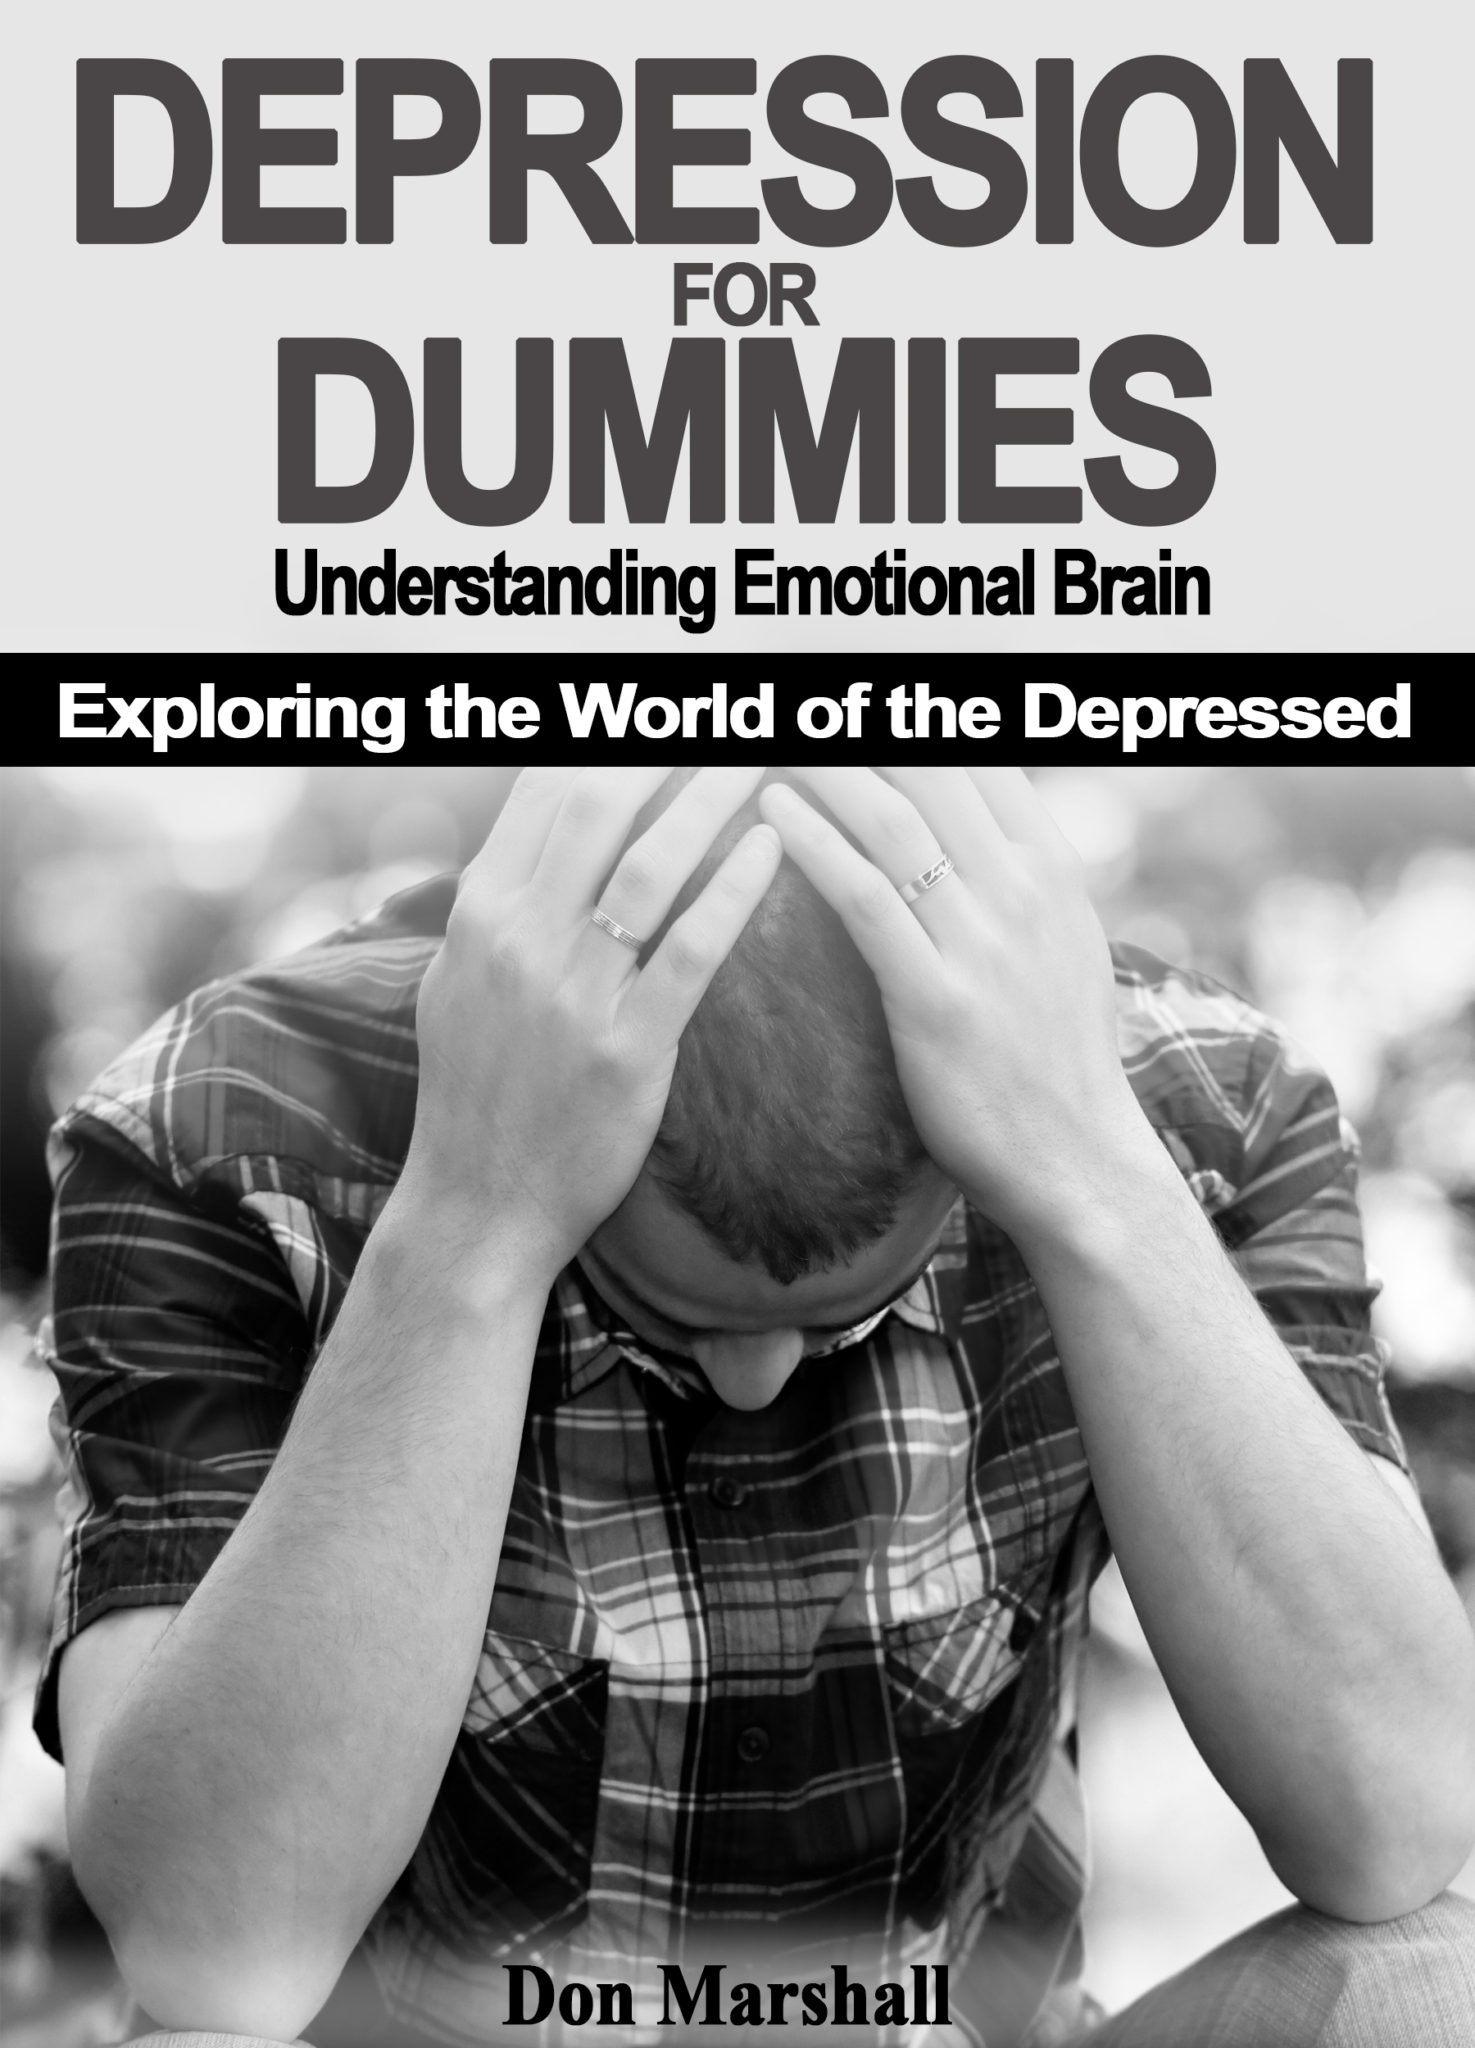 FREE: DEPRESSION FOR DUMMIES: Understanding Emotional Brain. Exploring the World of the Depressed  by Don Marshall